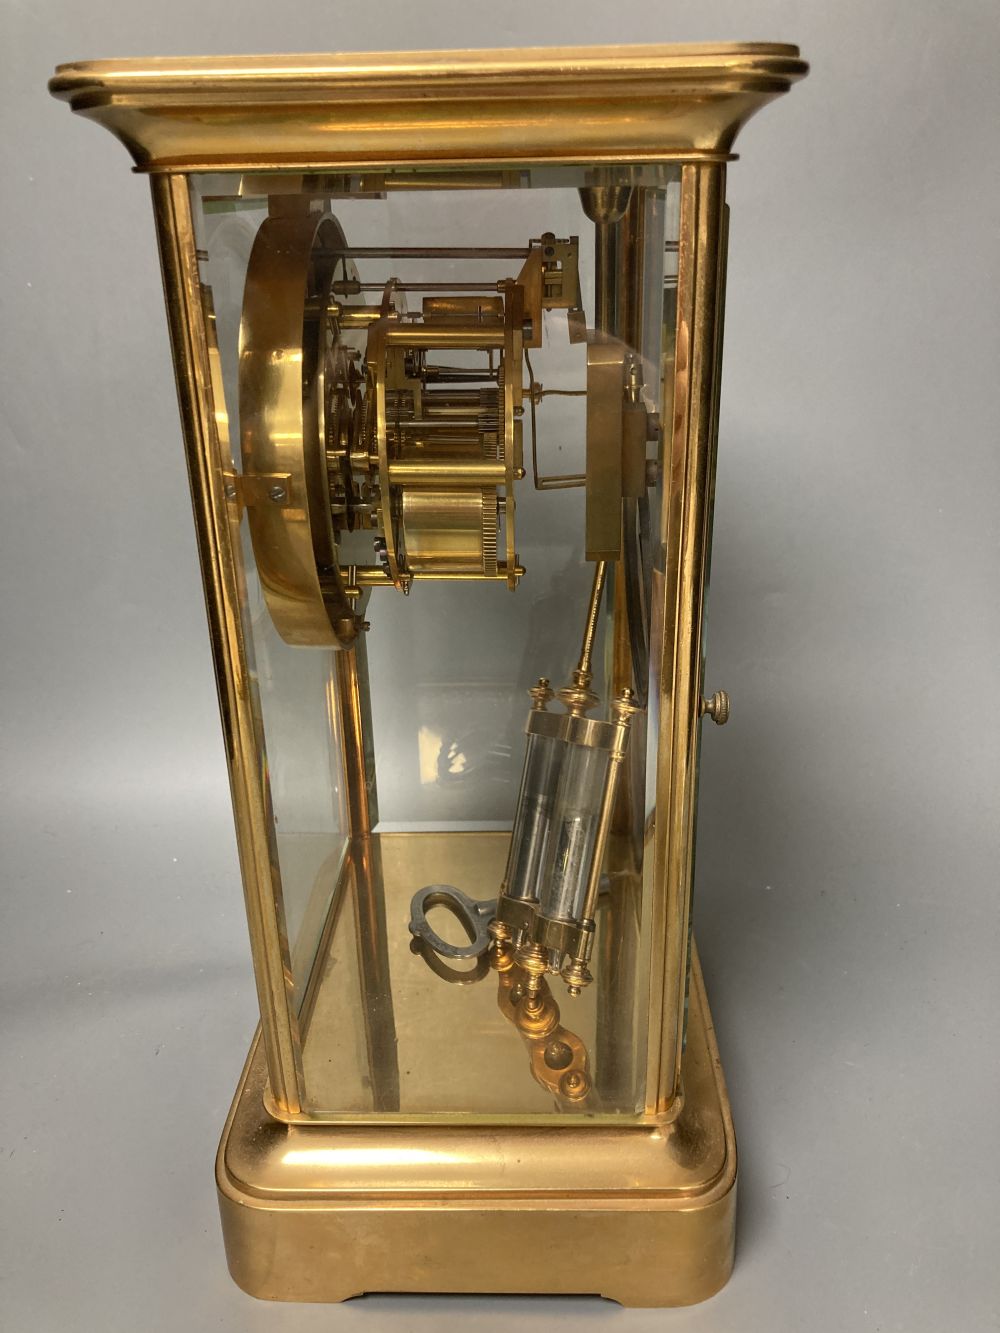 A French brass four glass mantel clock, retailed by J W Benson, with visible Brocot escapement and mercury filled pendulum bob, 33cm hi